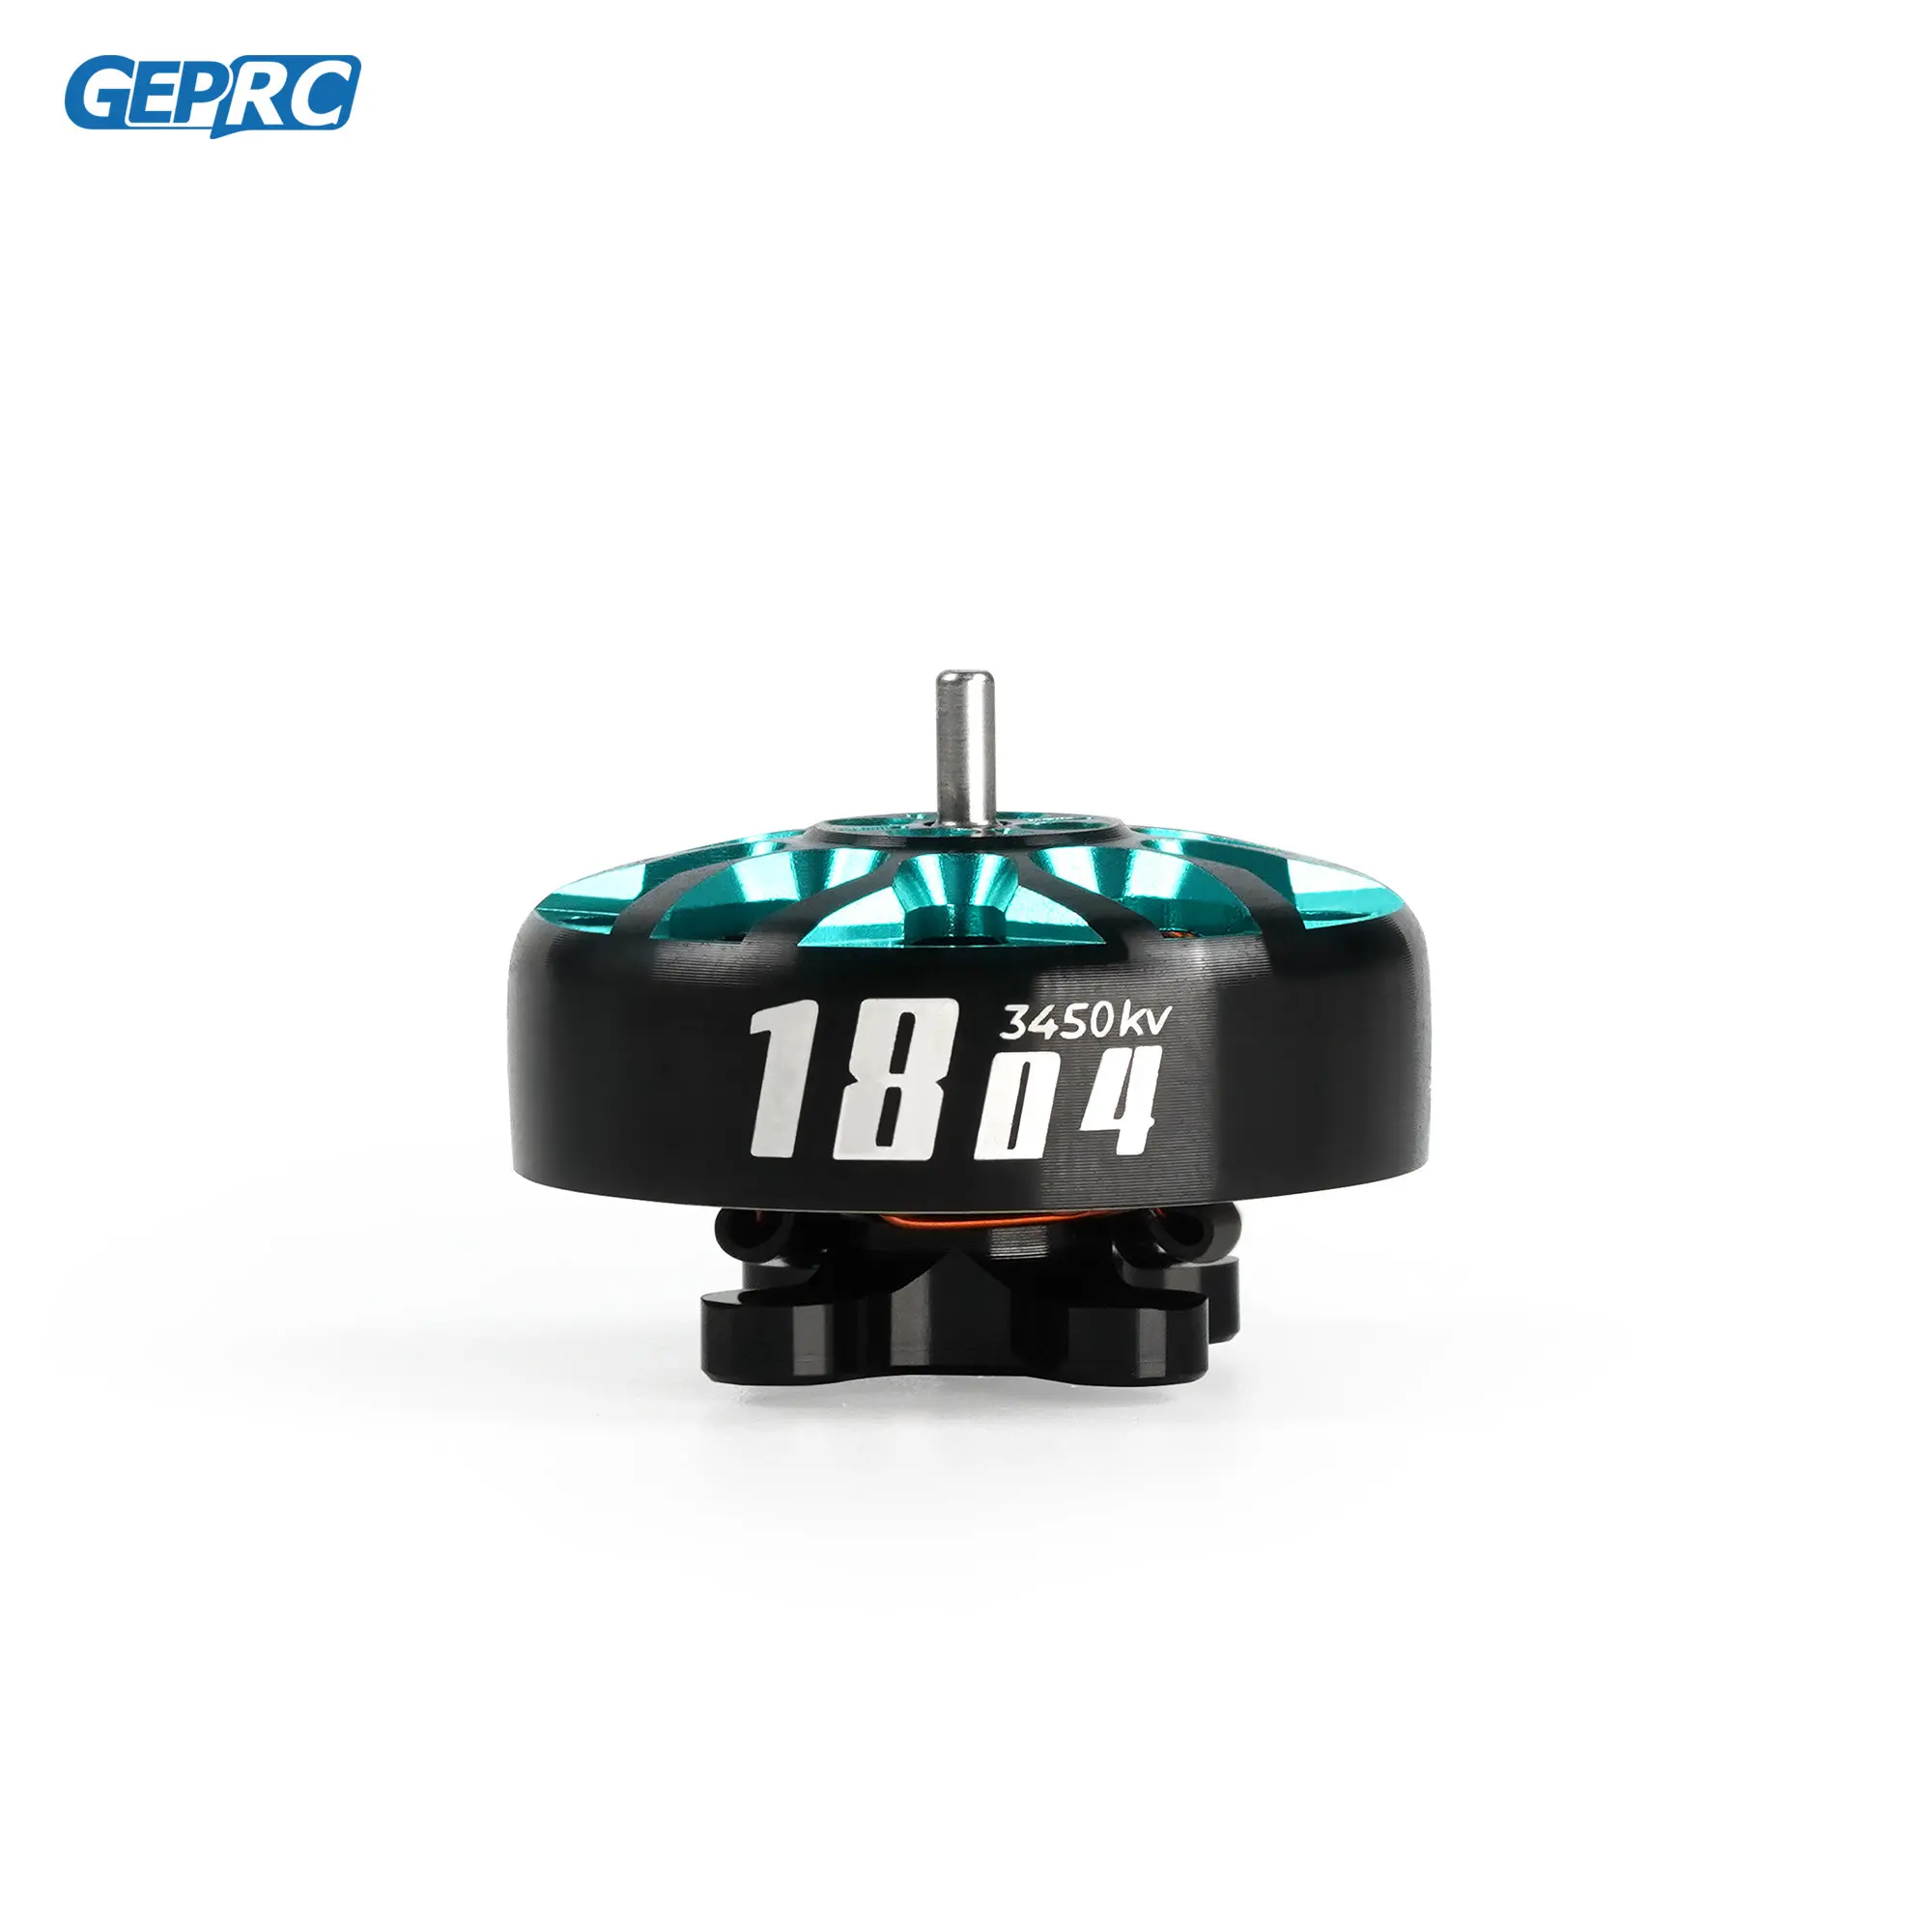 

GEPRC SPEEDX2 1804 2450KV 3450KV Motor 4S 6S Rushless Motor for FPV RC Multicopter Racing Drone Parts DIY PARTS